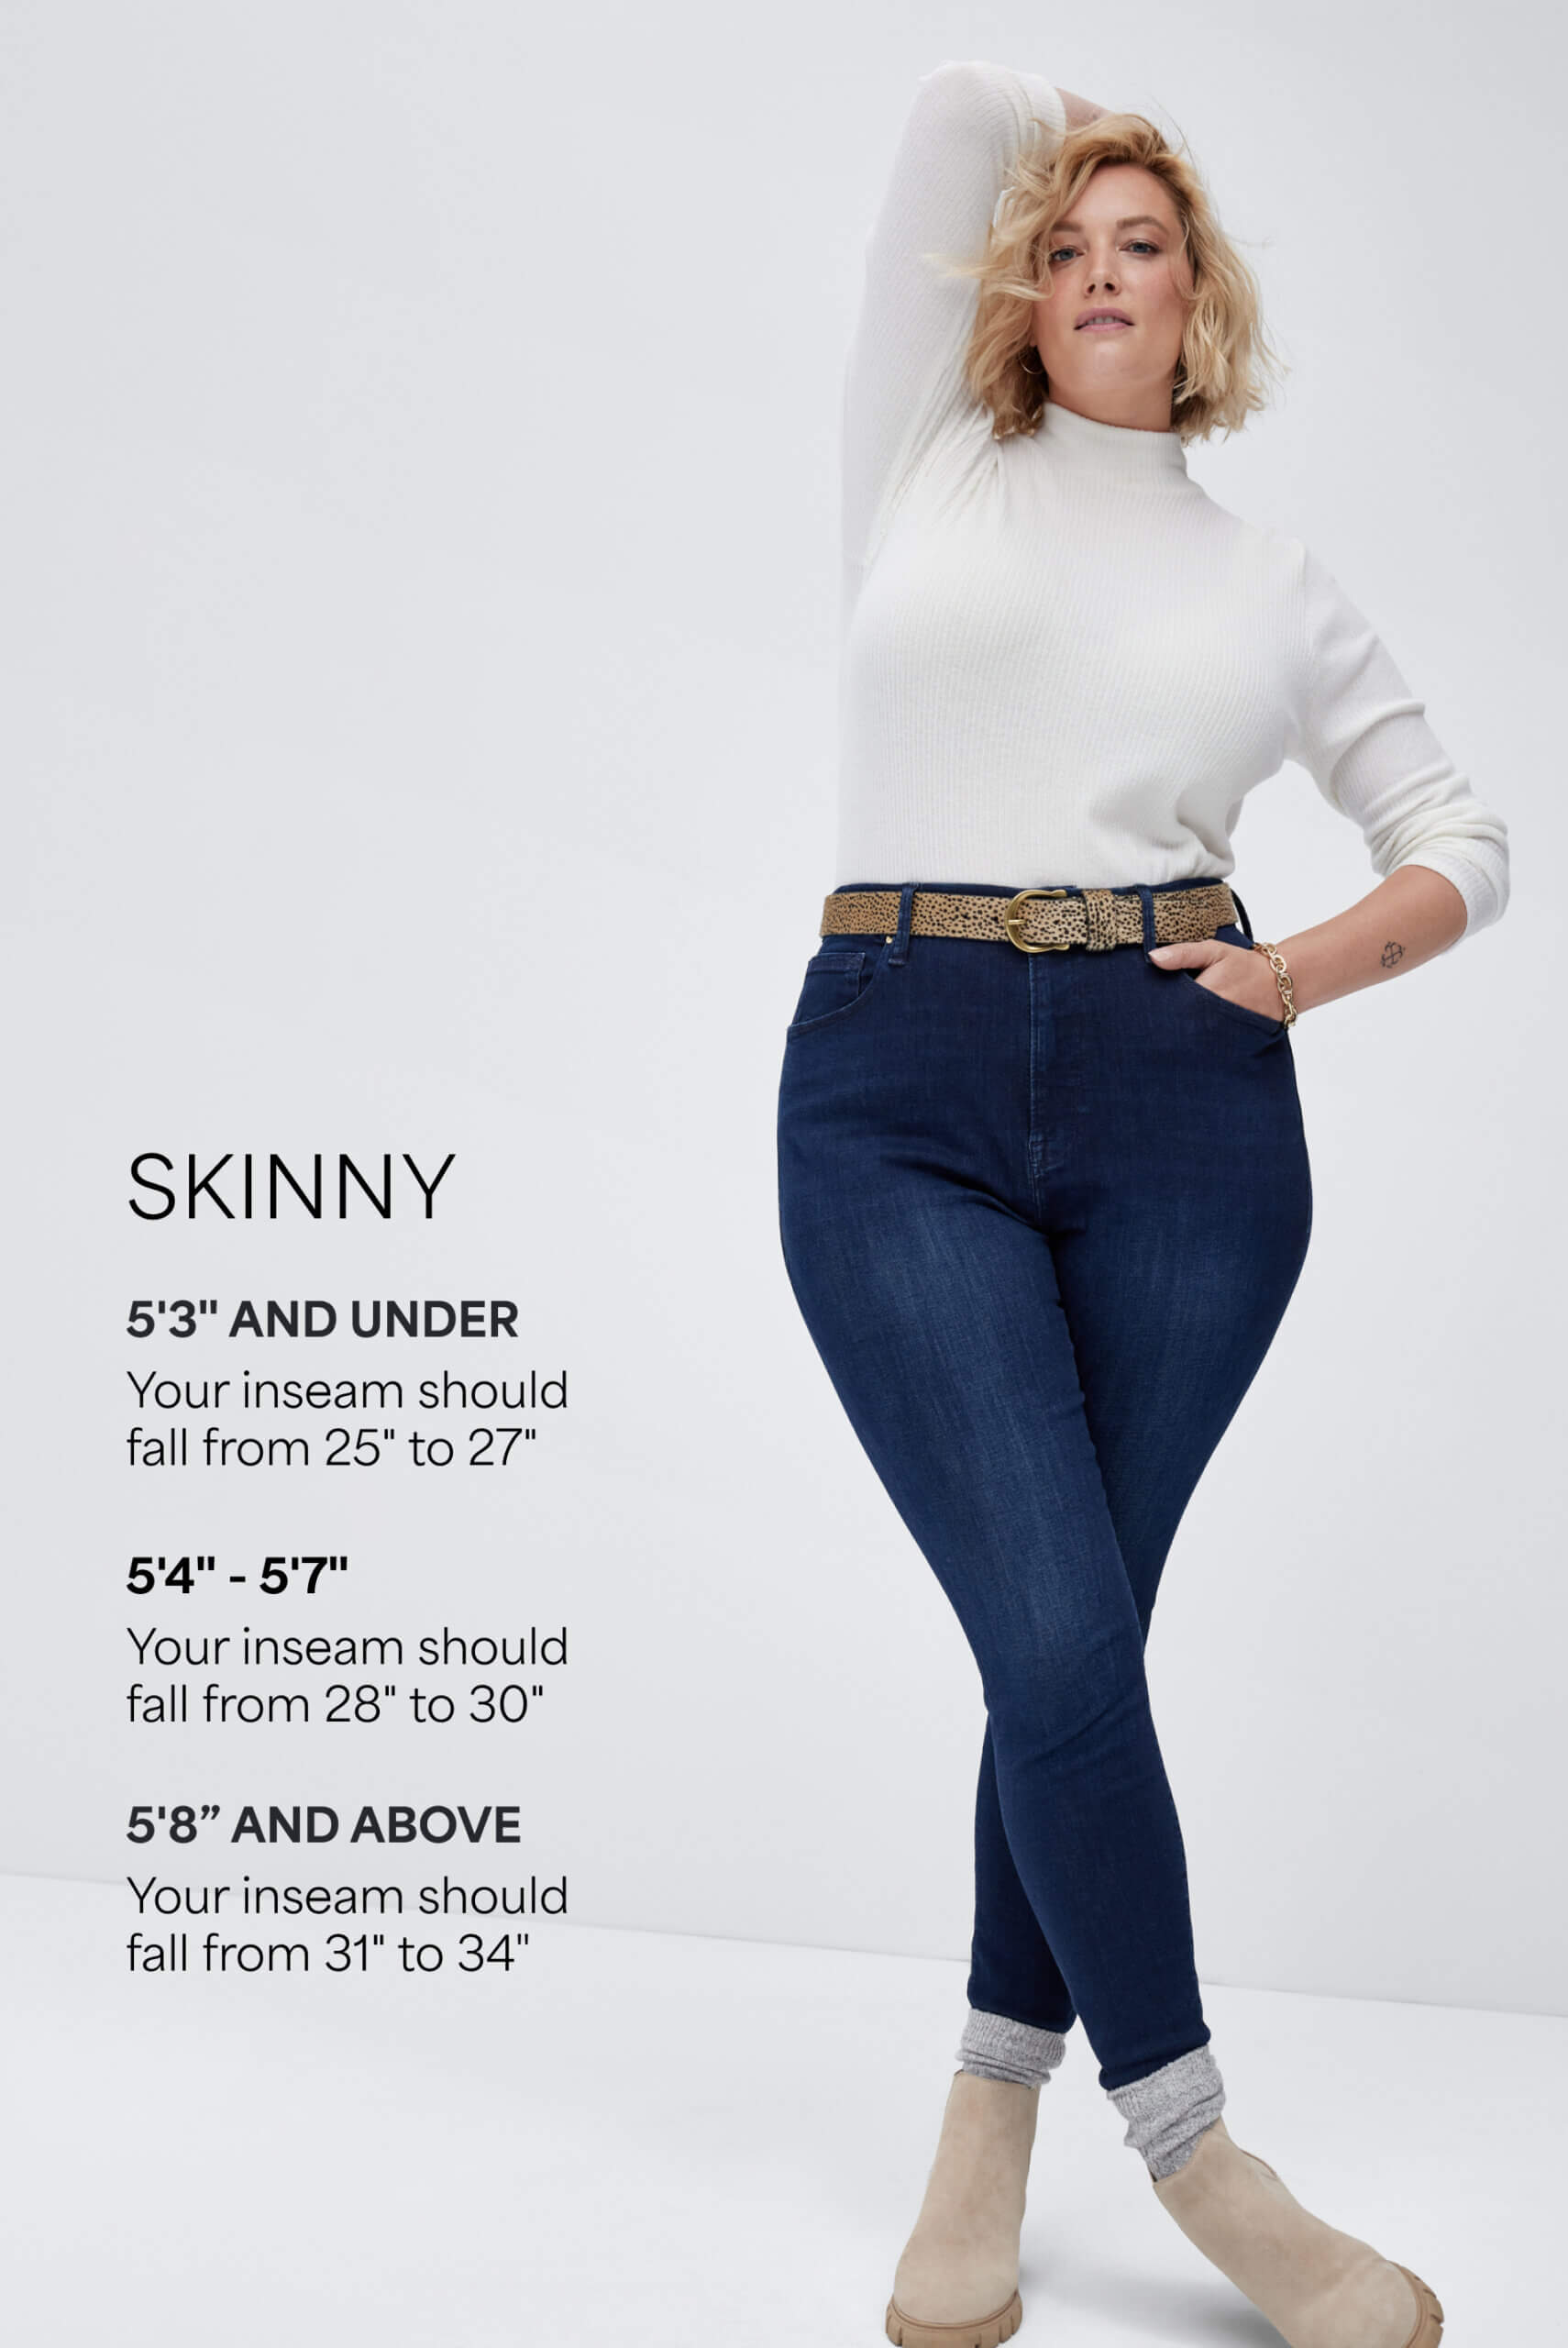 Plus-Size Leather Pants Shopping Guide